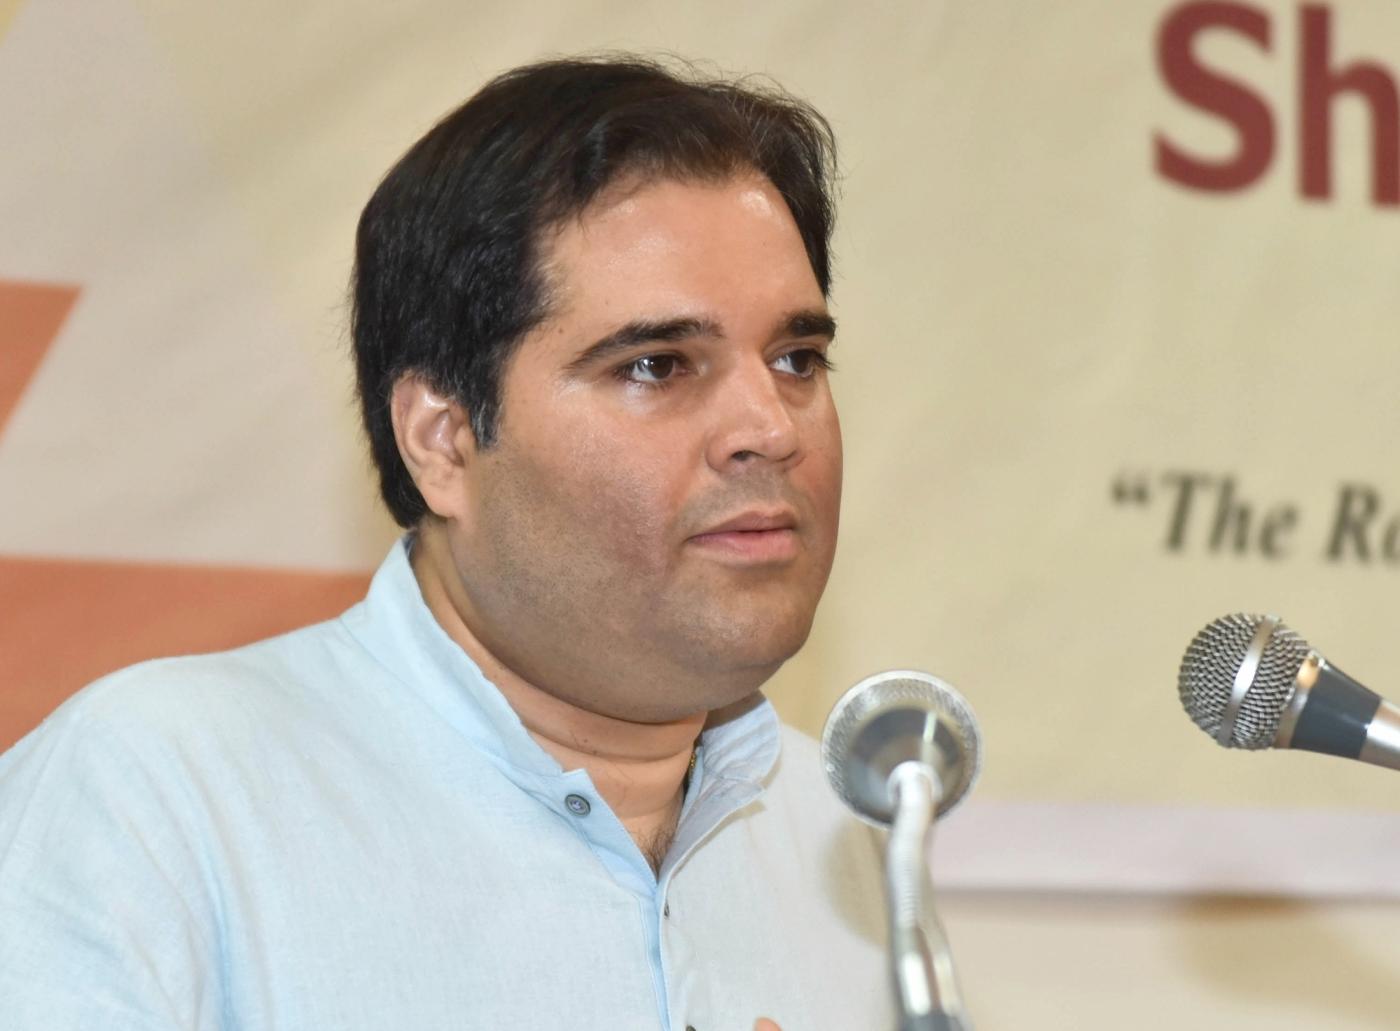 Bengaluru: BJP MP Varun Gandhi addresses during "The Road to Justice opportunities and Impediments" seminar, organised by National Law School of India, in Bengaluru, on July 19, 2018. (Photo: IANS) by .